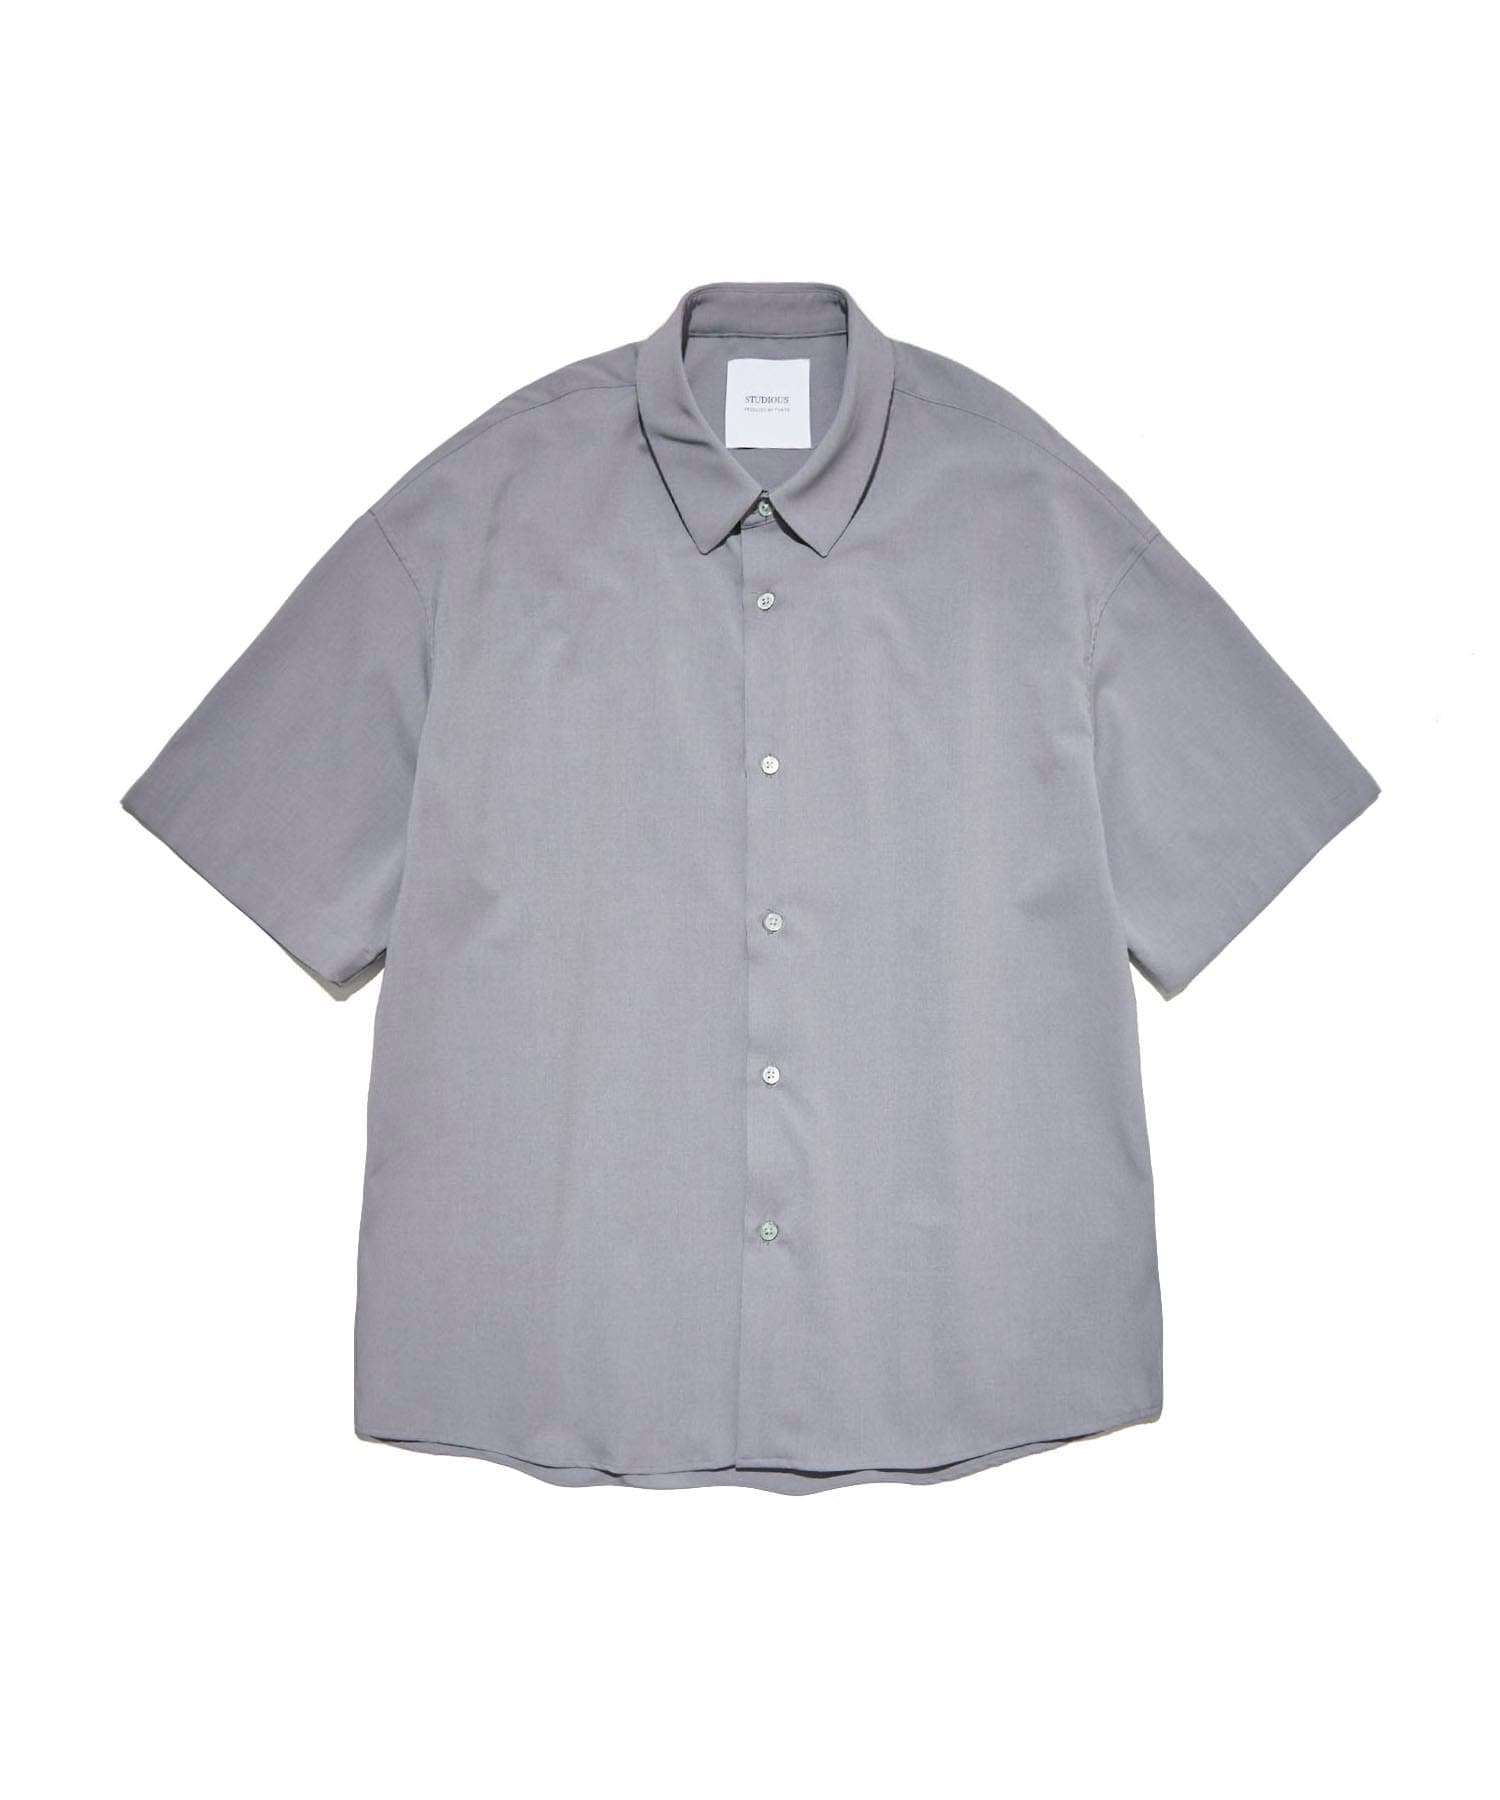 SHIRT SALE ITEMS | STUDIOUS ONLINE公式通販サイト